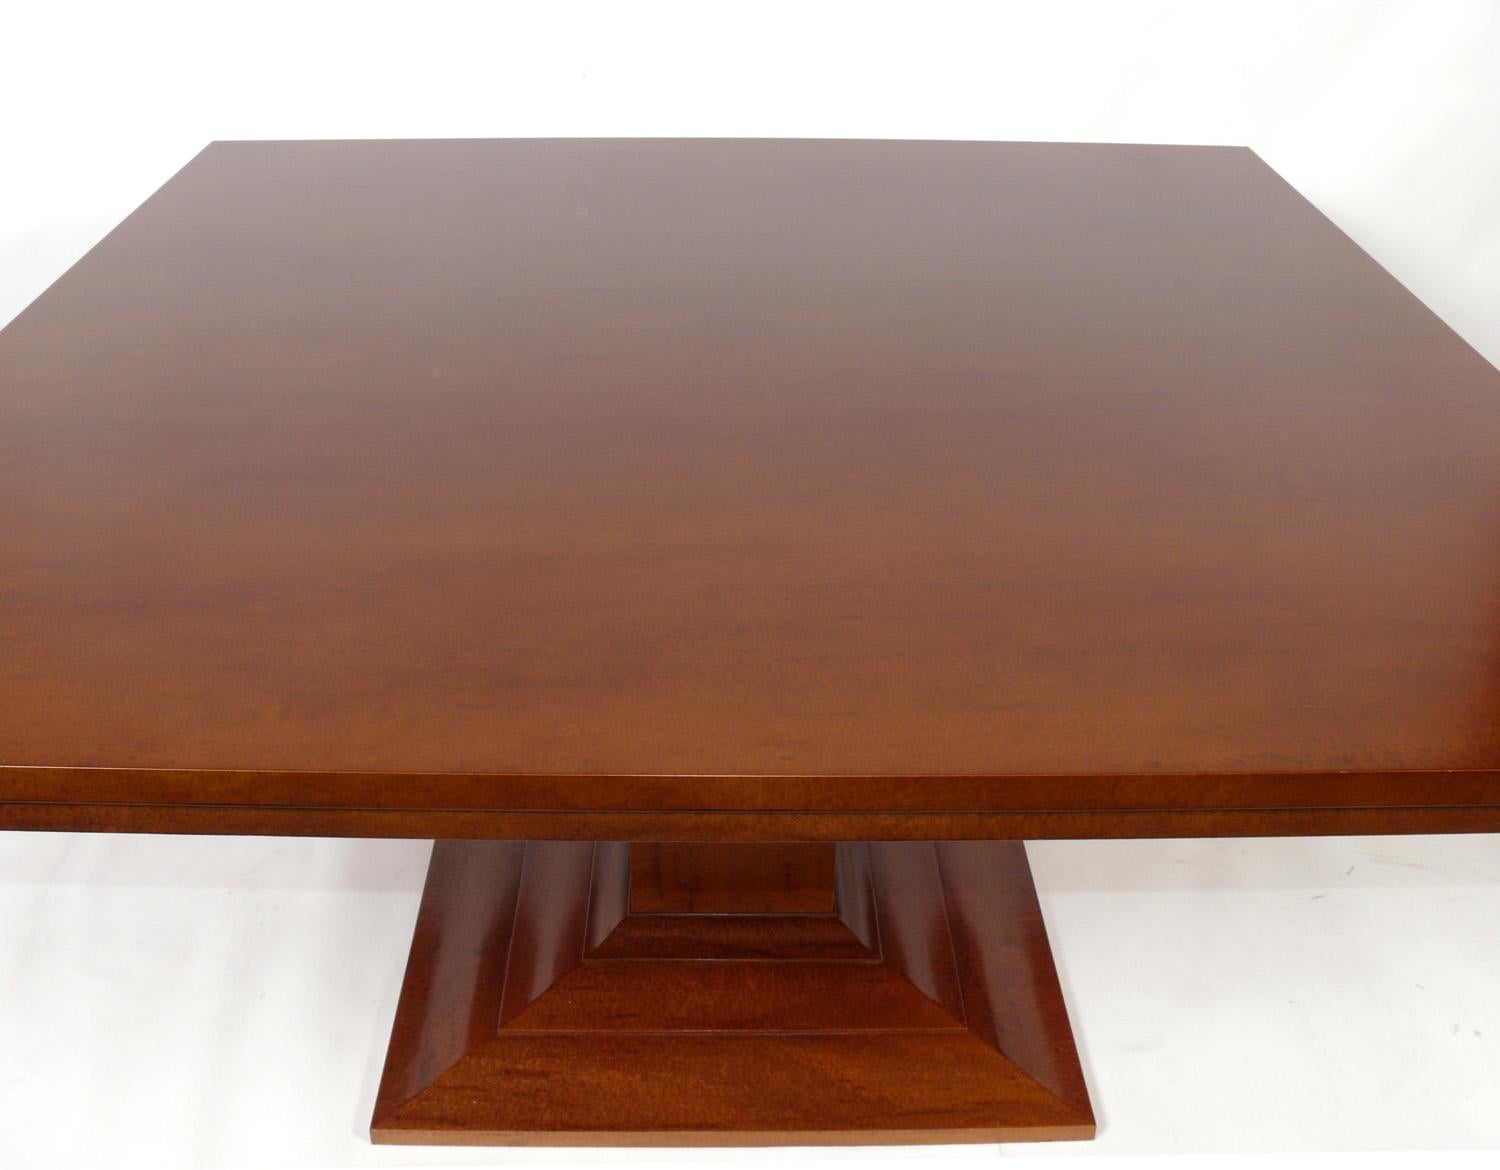 French Art Deco style custom dining table, hand made by Frank Pollaro, American, circa 2000. This custom dining creation, made of hand rubbed plum pudding mahogany, originally retailed for $12,000 in 2000. It seats 8 people, two on each side.